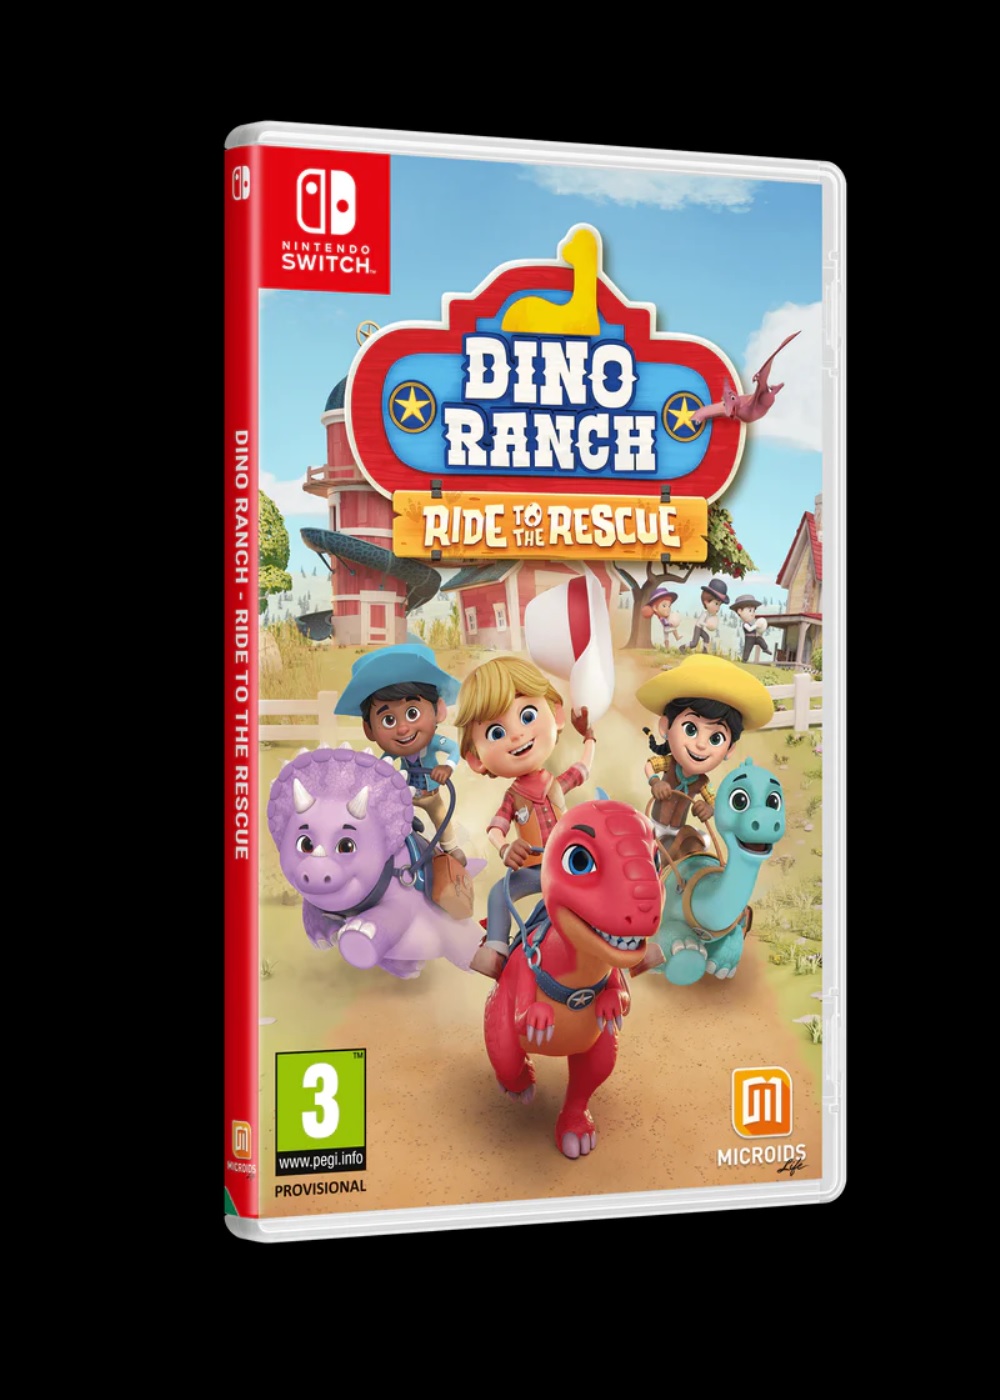 Dino Ranch – Ride to the Rescue